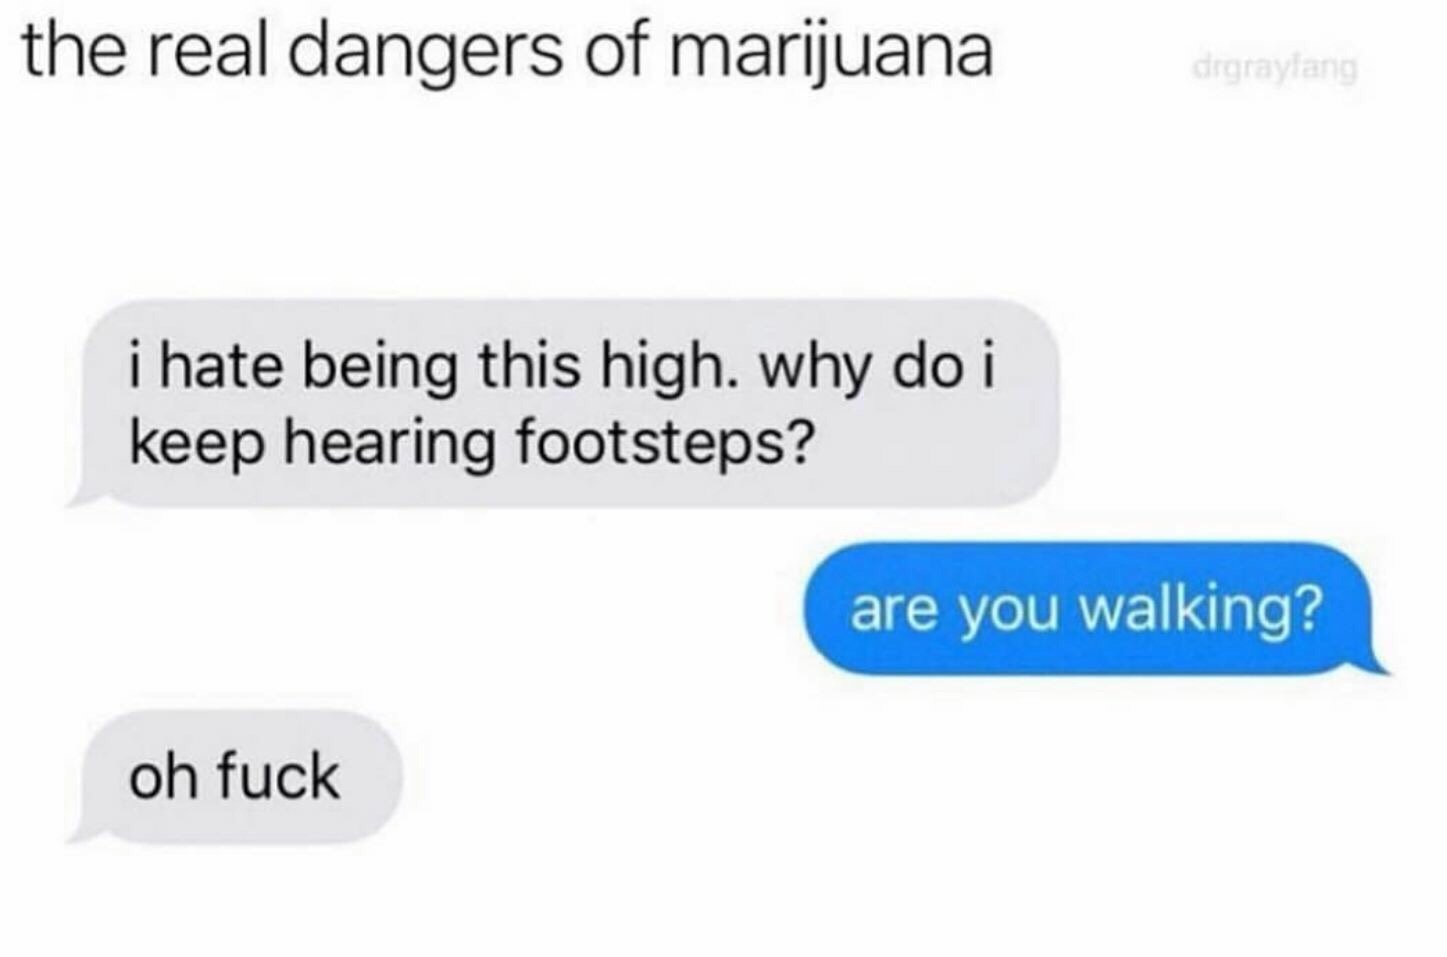 do i keep hearing footsteps - the real dangers of marijuana i hate being this high. why do i keep hearing footsteps? are you walking? oh fuck